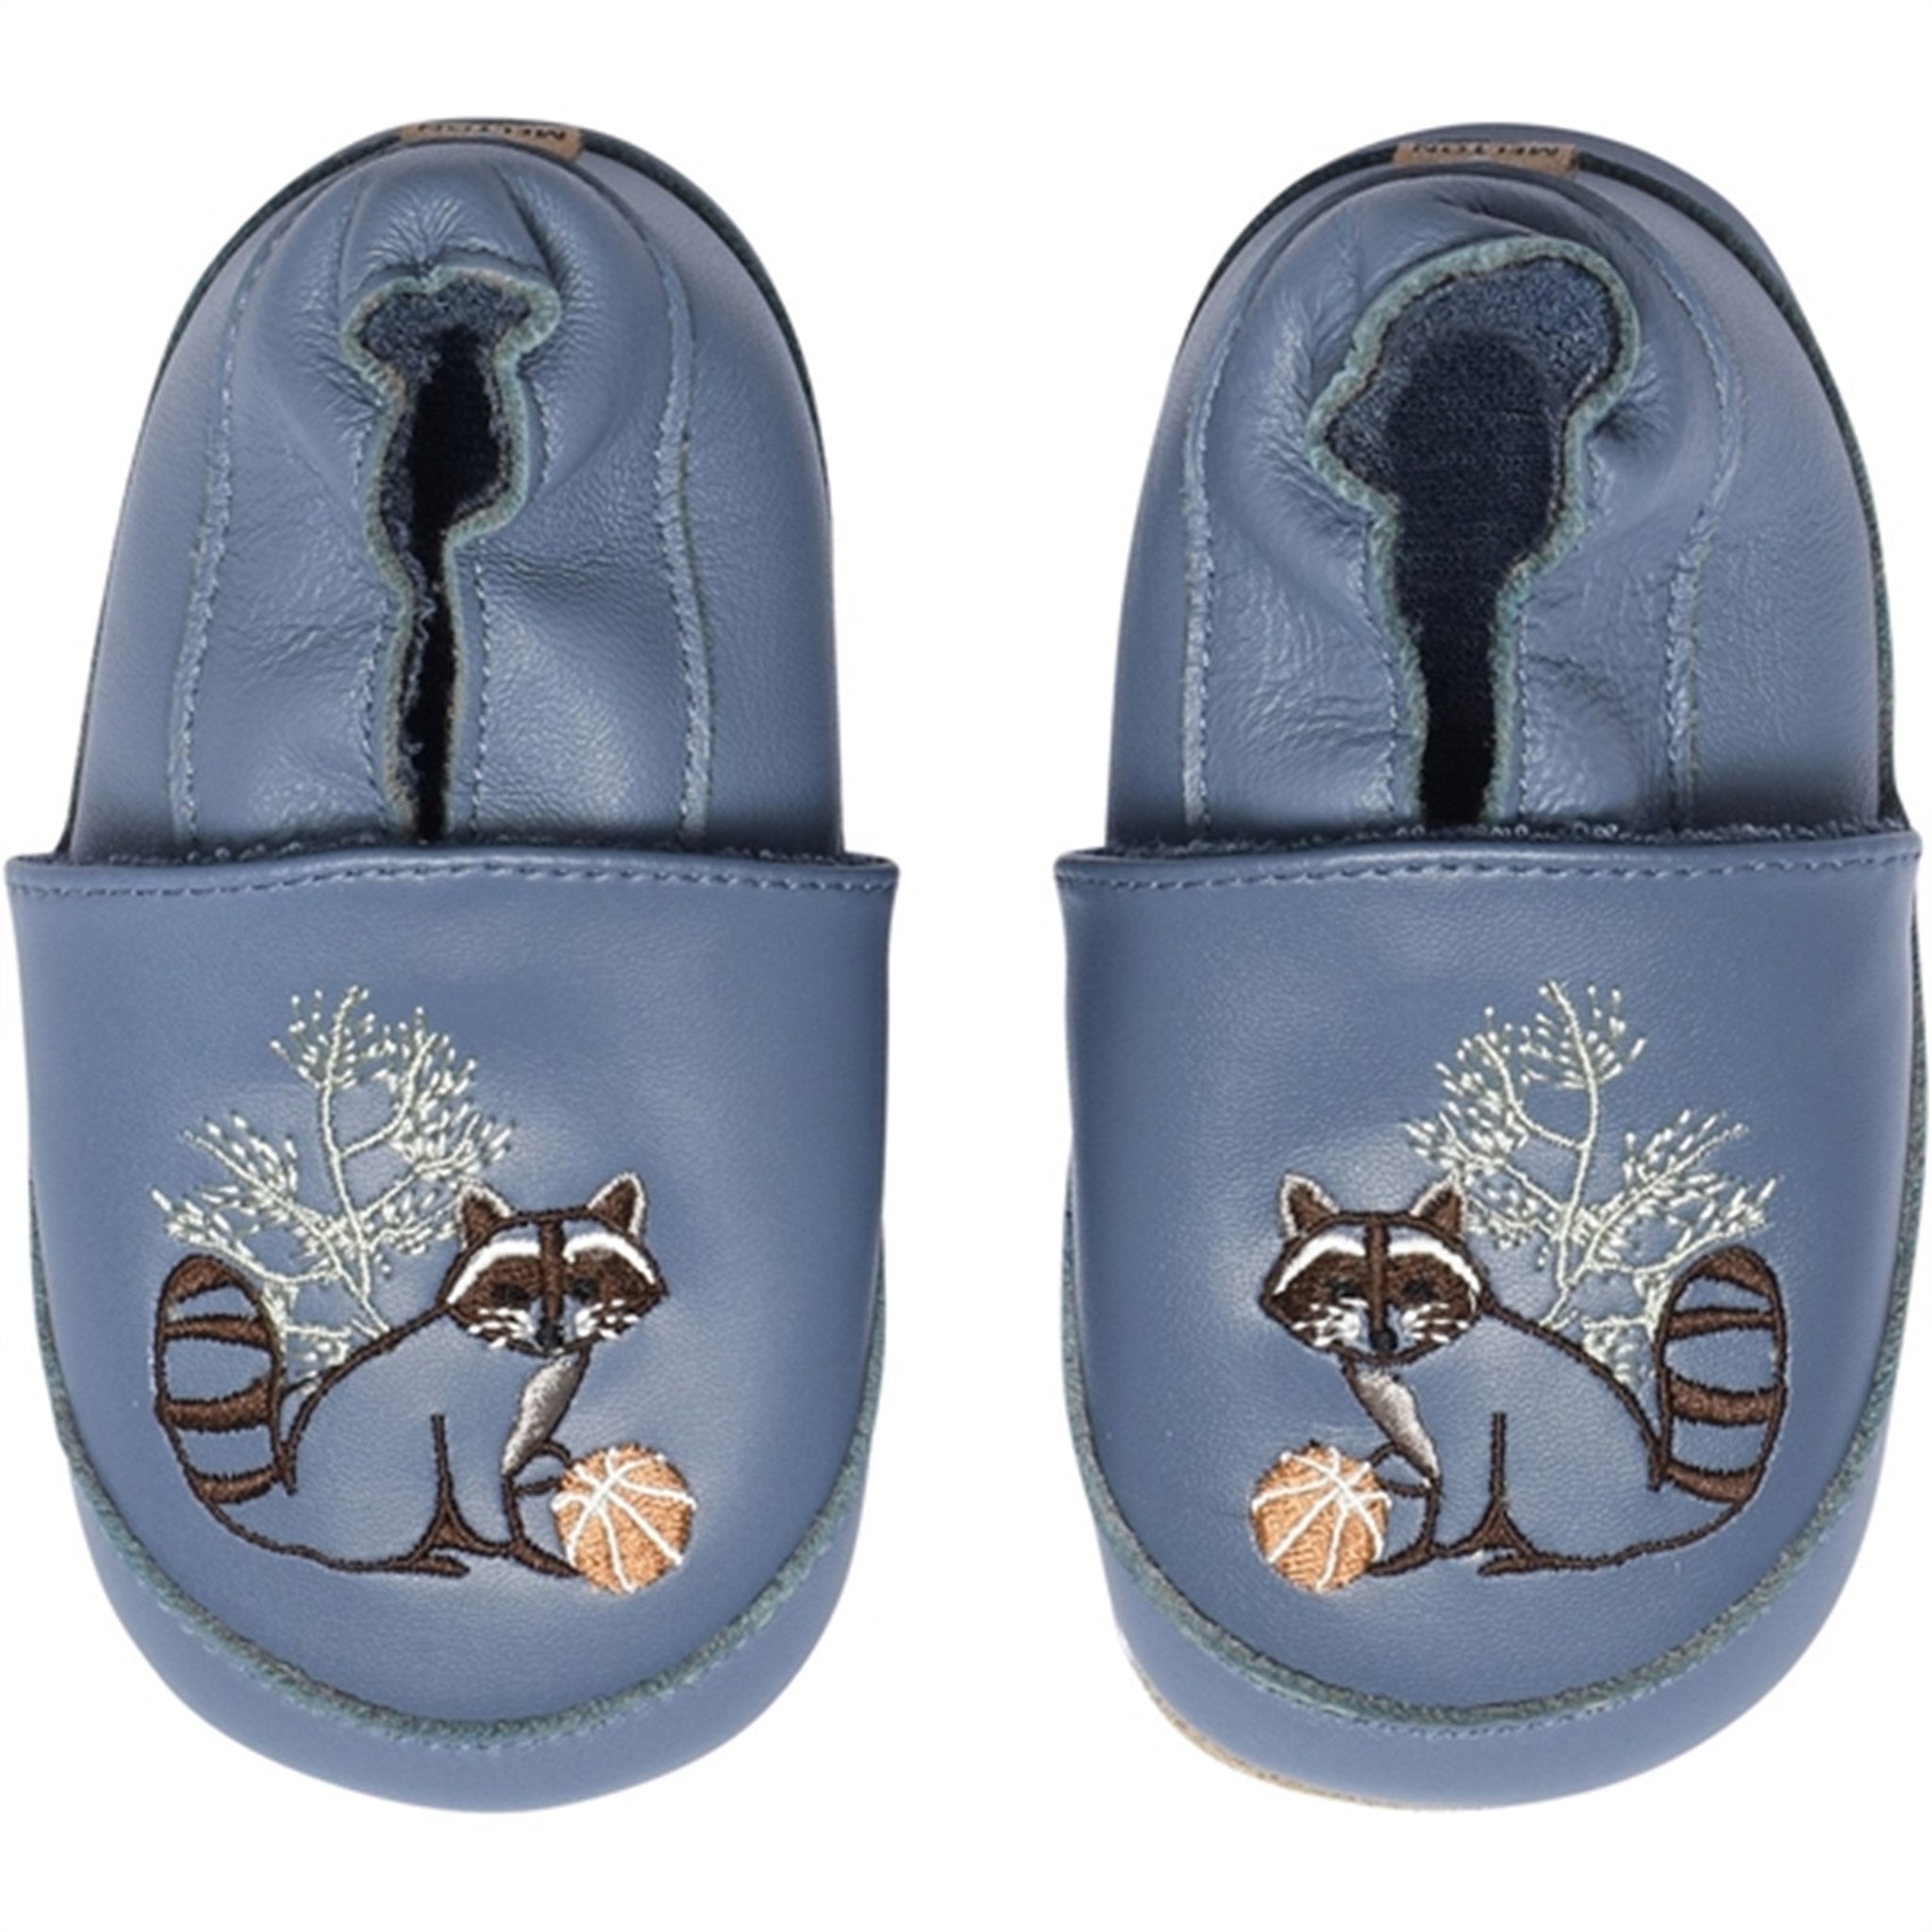 MELTON Leather Slippers with Raccoon Bluefin